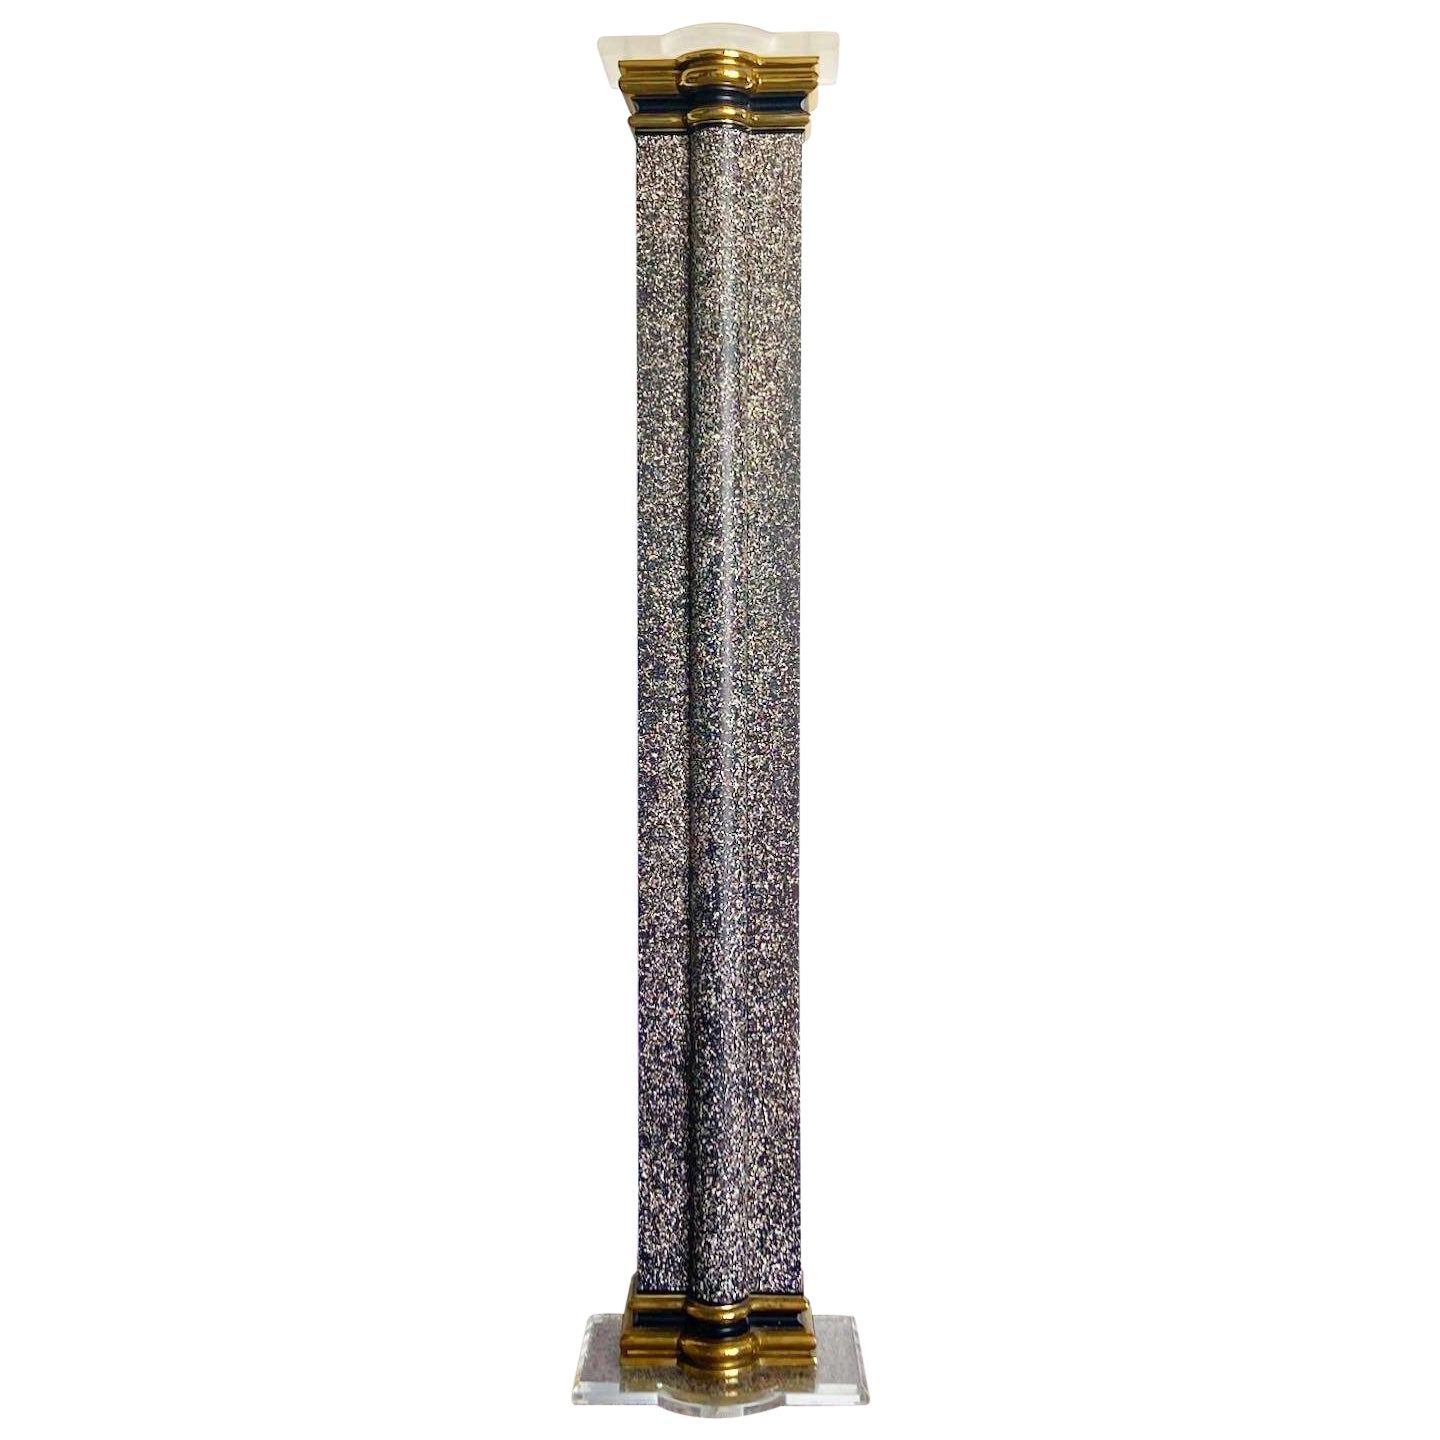 Art of Vintage Vintage Black White and Gold Torchiere Floor Lamp